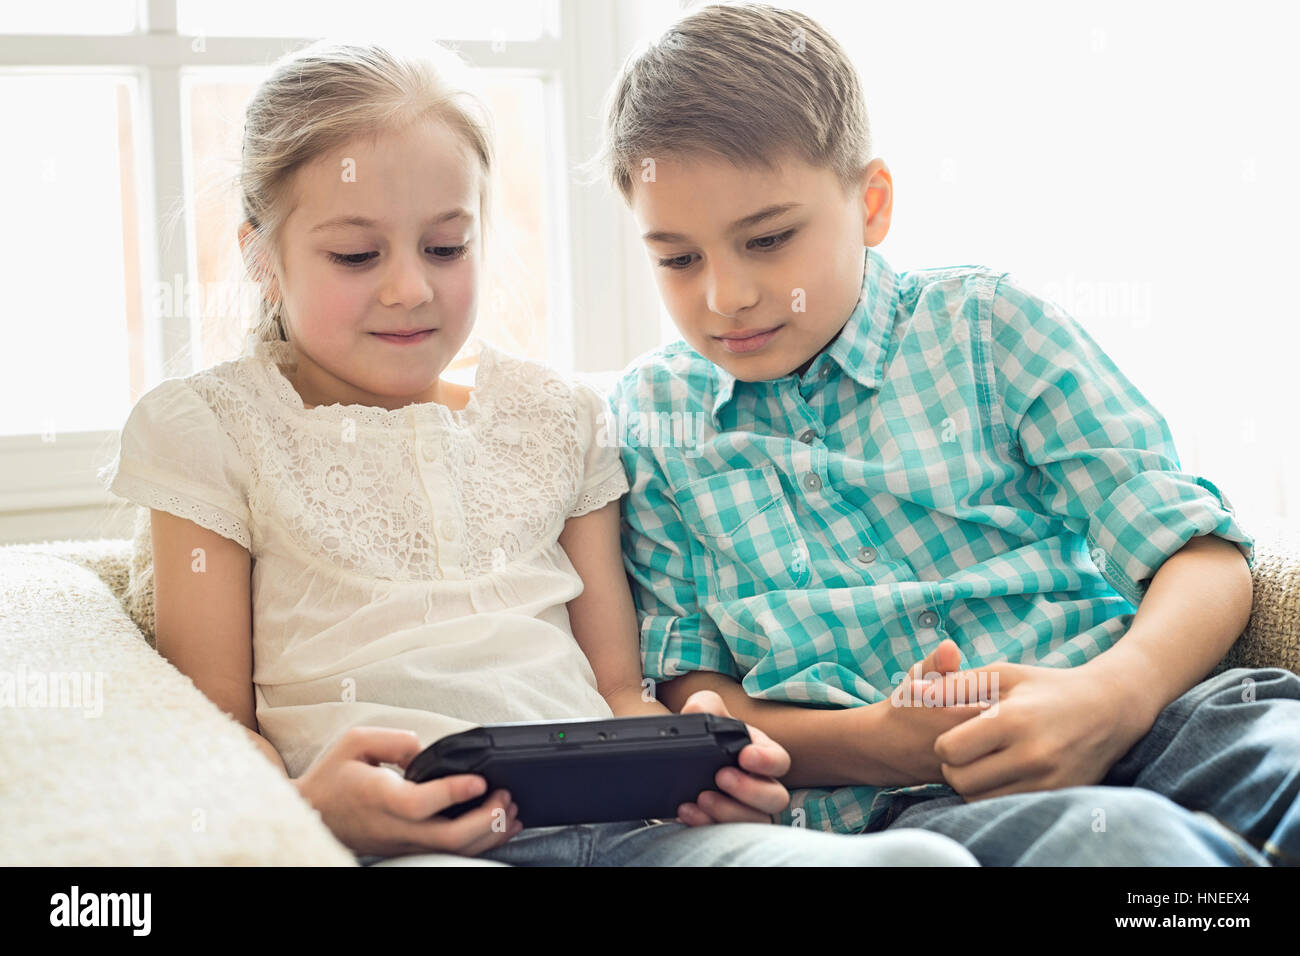 Siblings playing hand-held video game at home Stock Photo